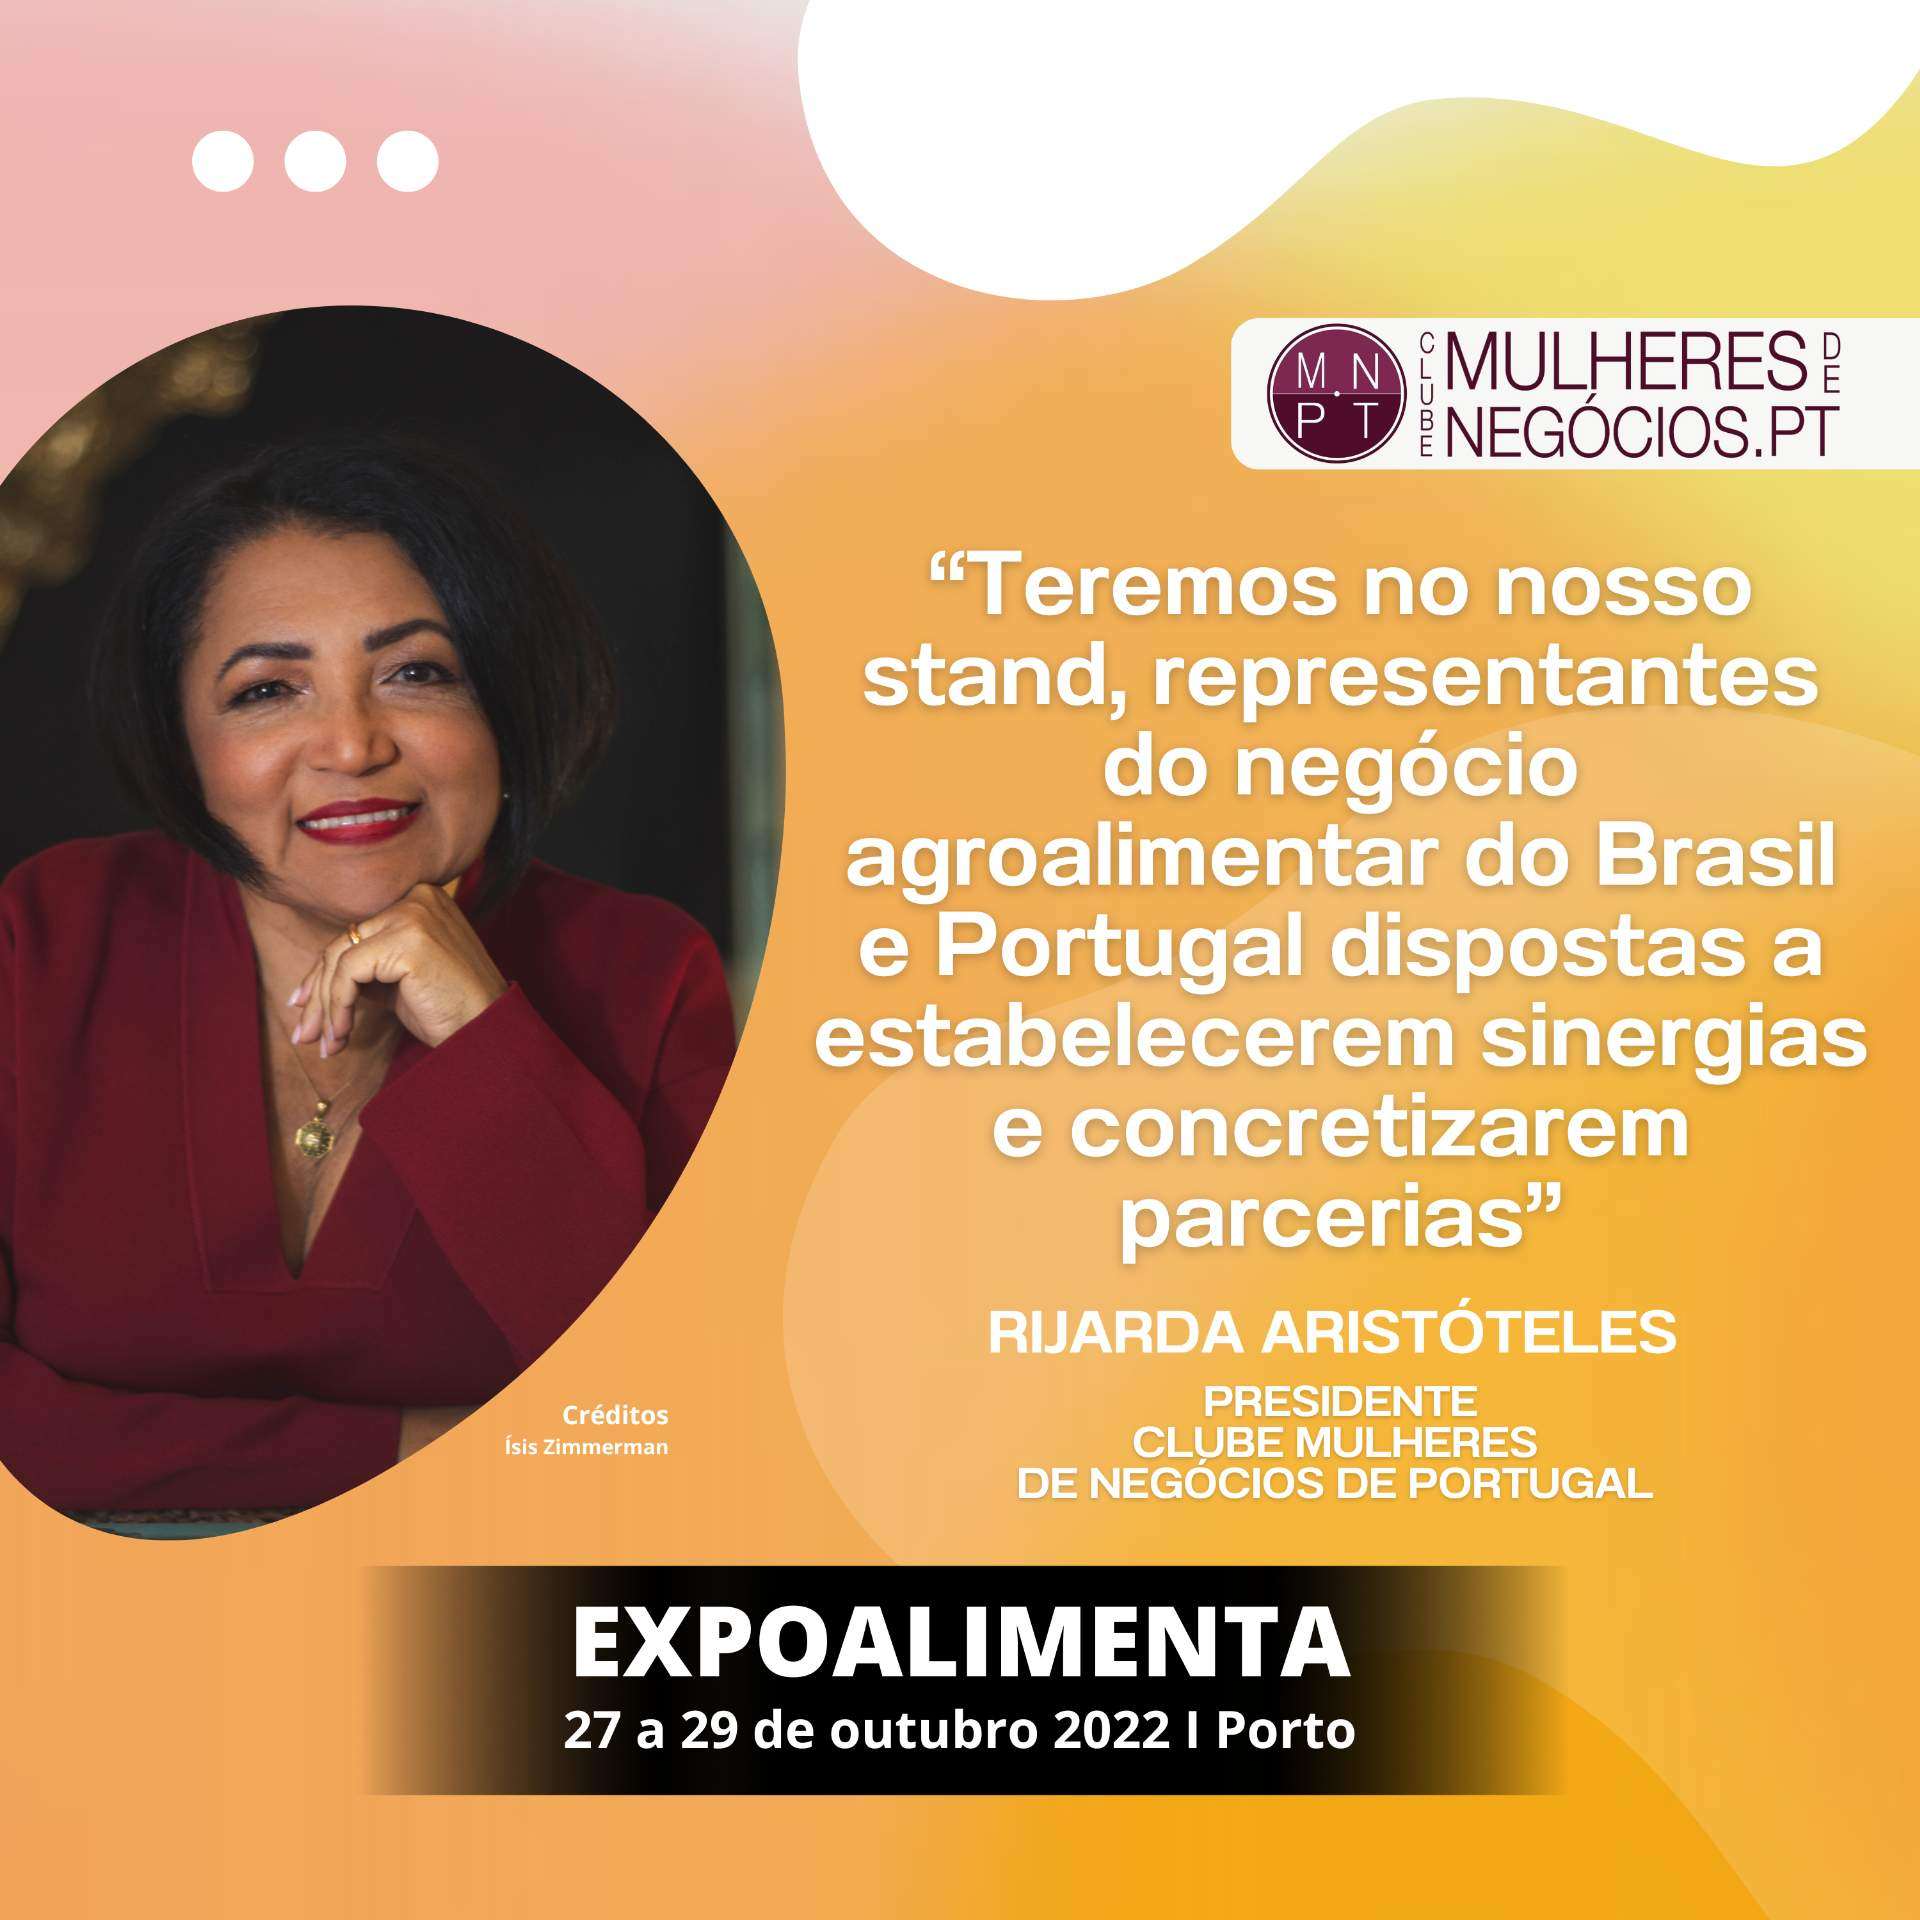 Clube Mulheres de Negócios de Portugal: "We will have at our booth, representatives of the agro-food business from Brazil and Portugal willing to establish synergies and make partnerships".